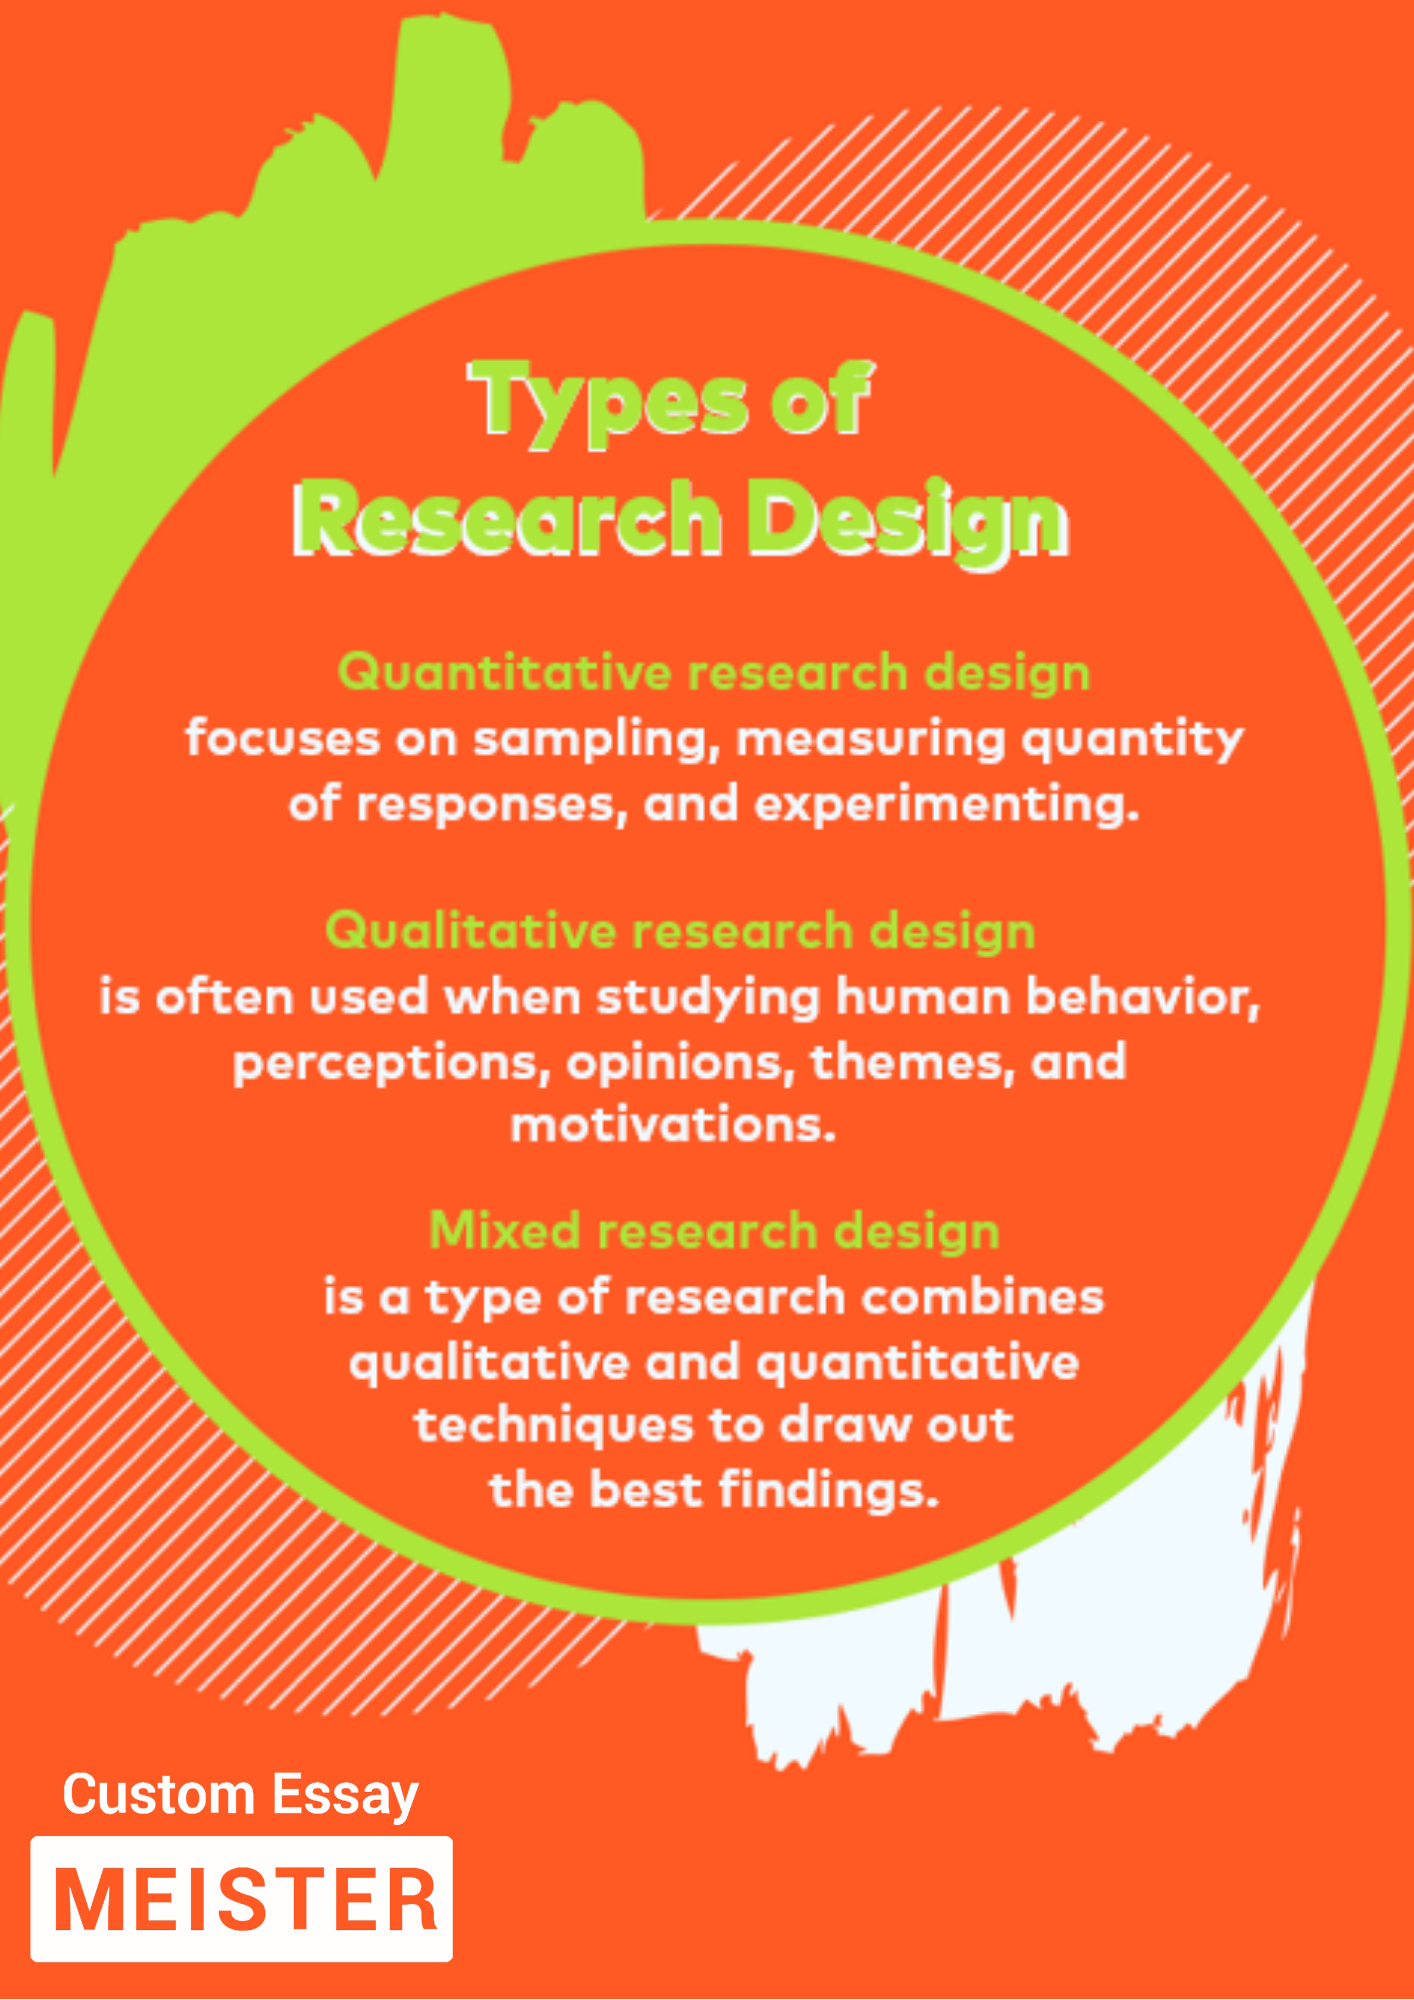 how to do a research design